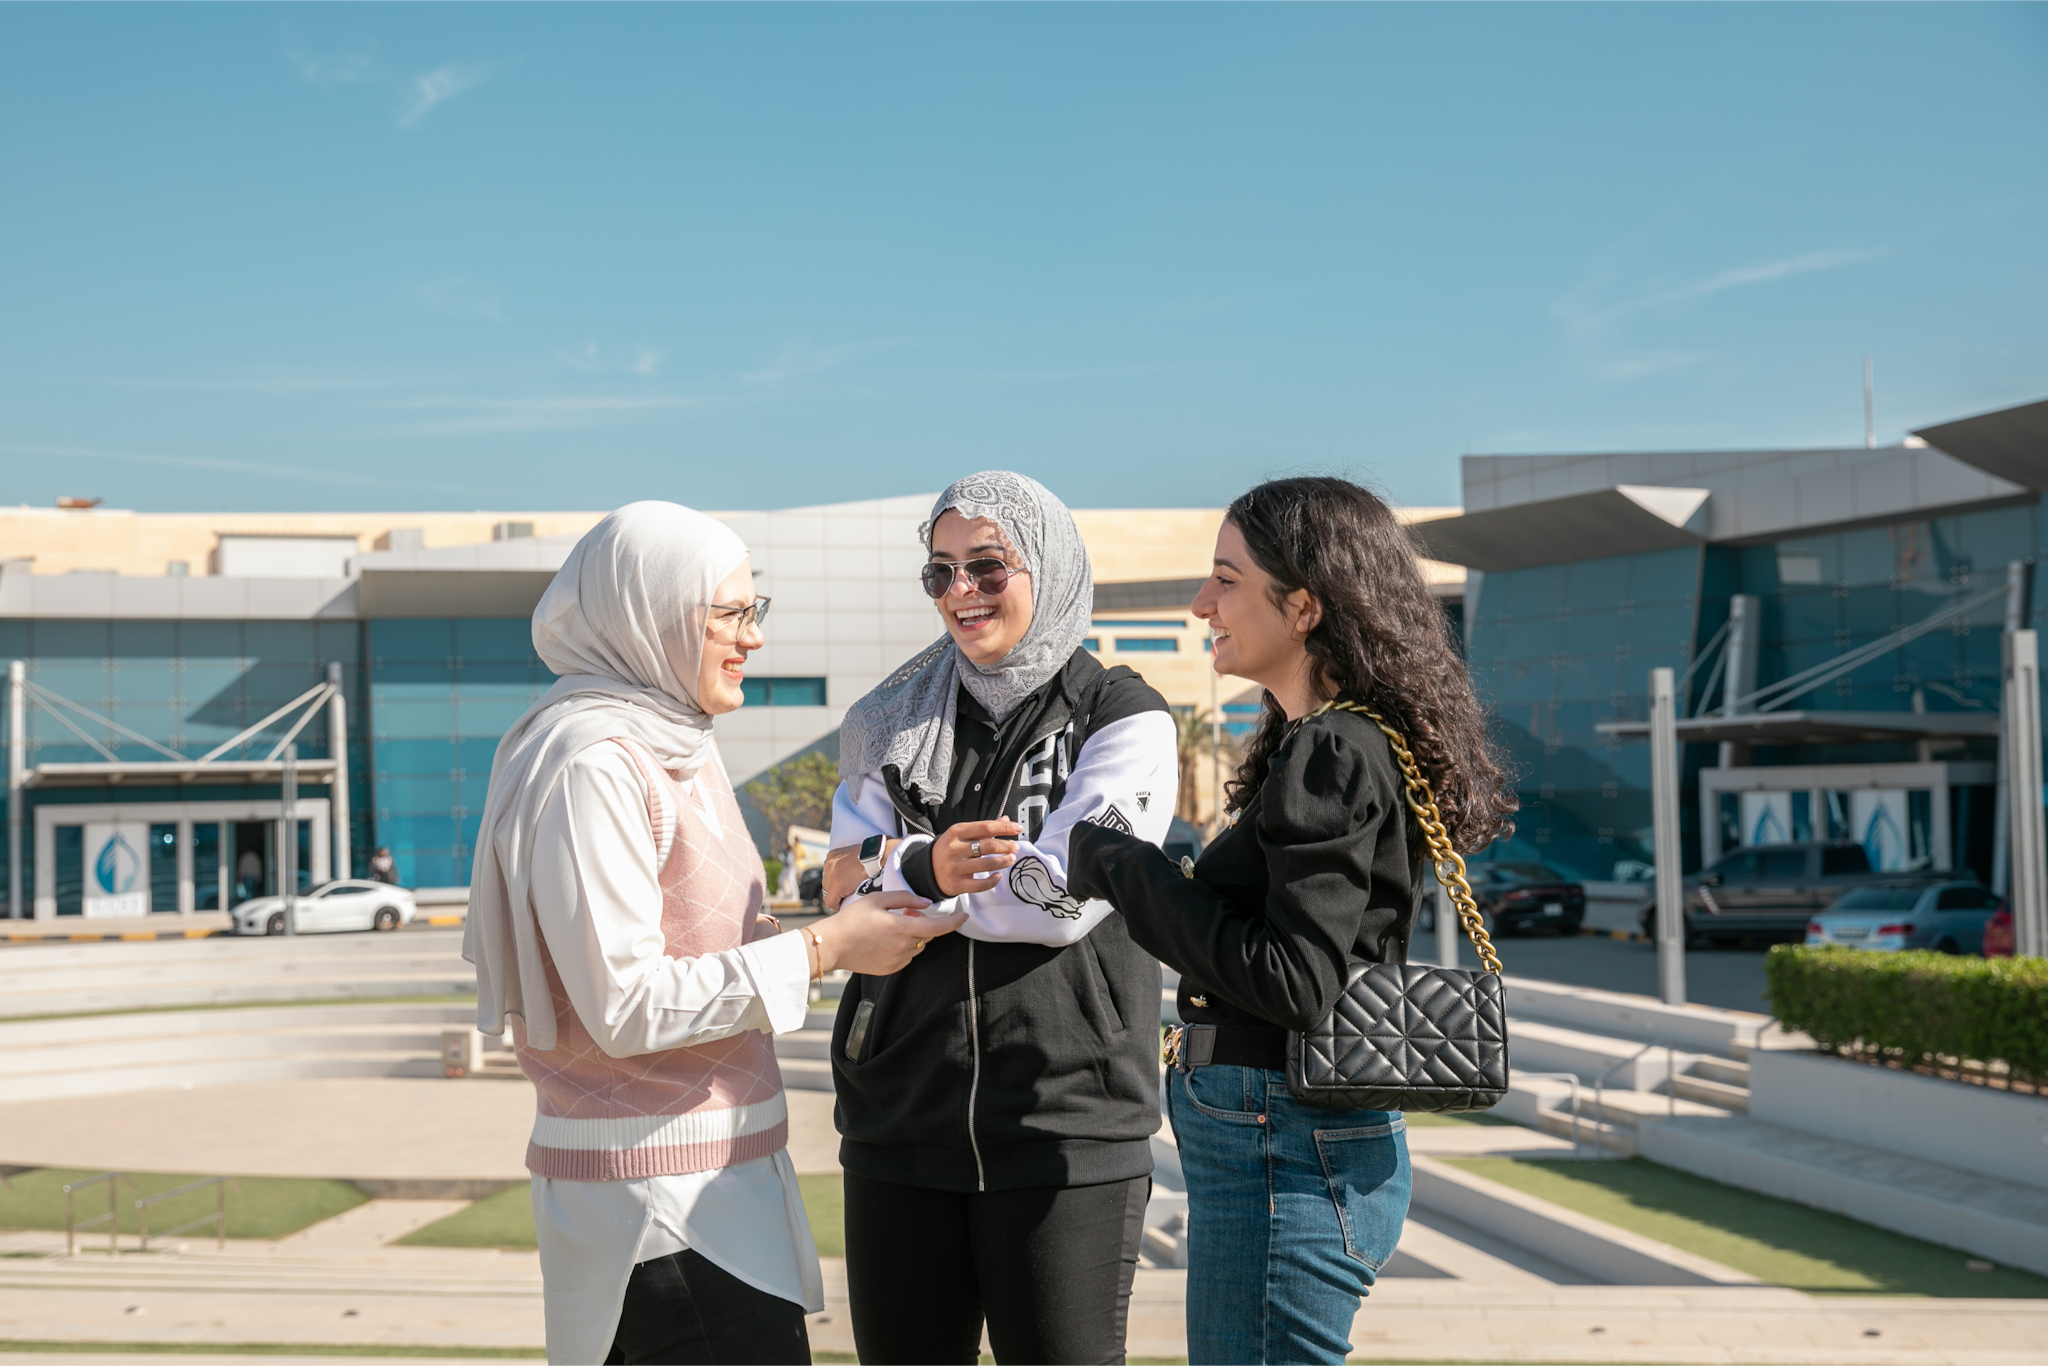 Explore Programs Available at GUST